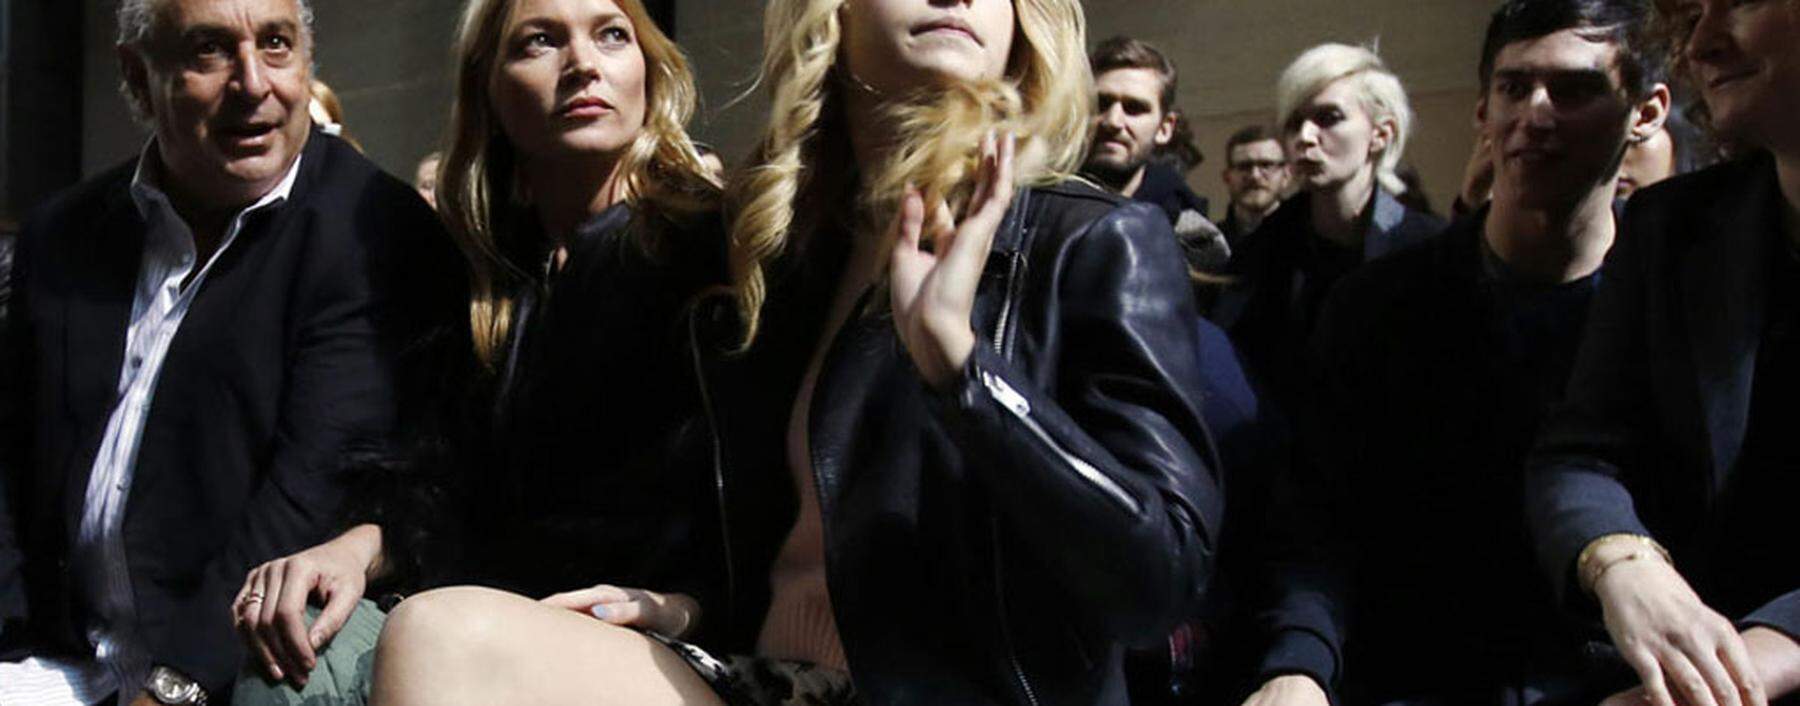 Philip Green, former model Kate Moss and her sister Lottie Moss sit in the front row before the Topshop Unique Autumn/Winter 2014 catwalk show during London Fashion Week